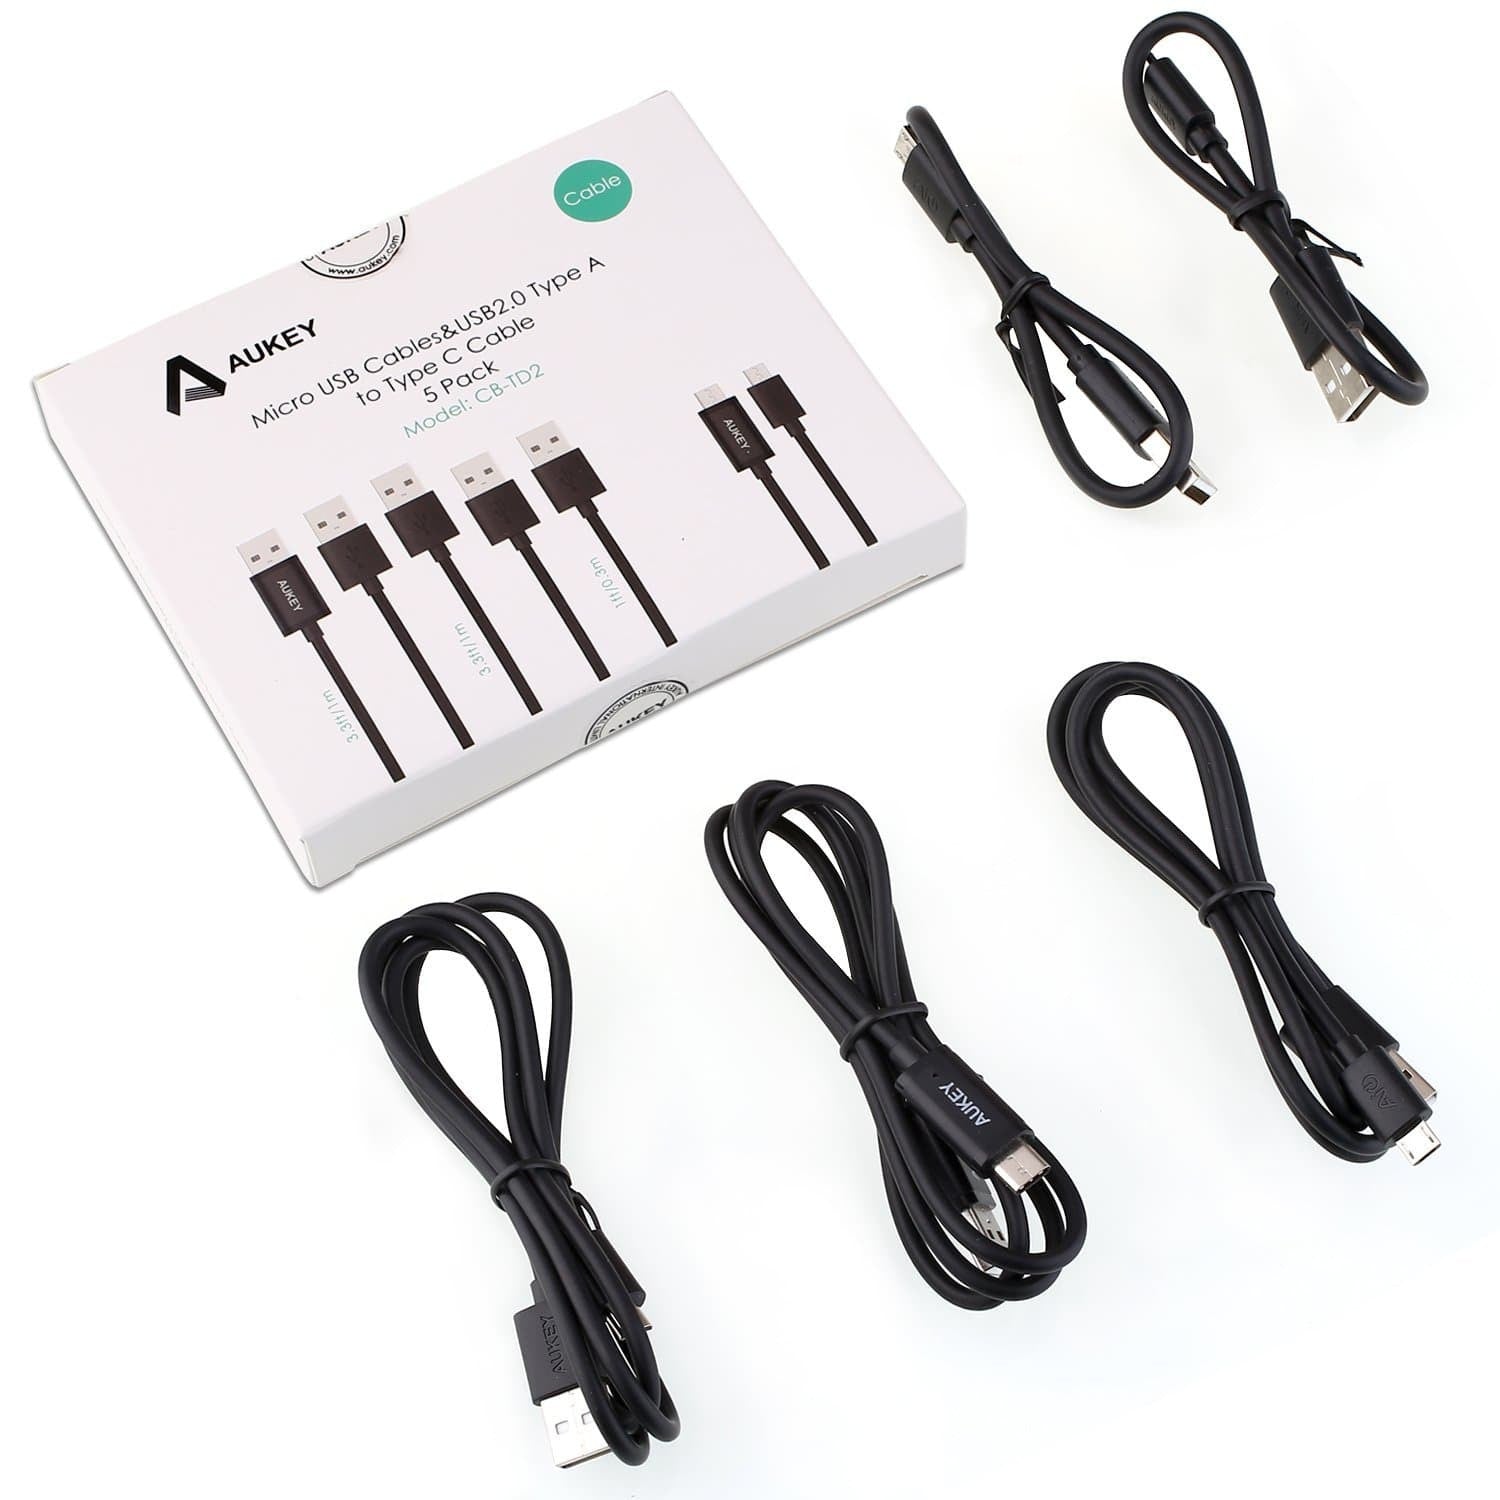 AUKEY CB-TD2 USB C + Micro USB Qualcomm Quick Charge Cable (5 pack) - Aukey Malaysia Official Store